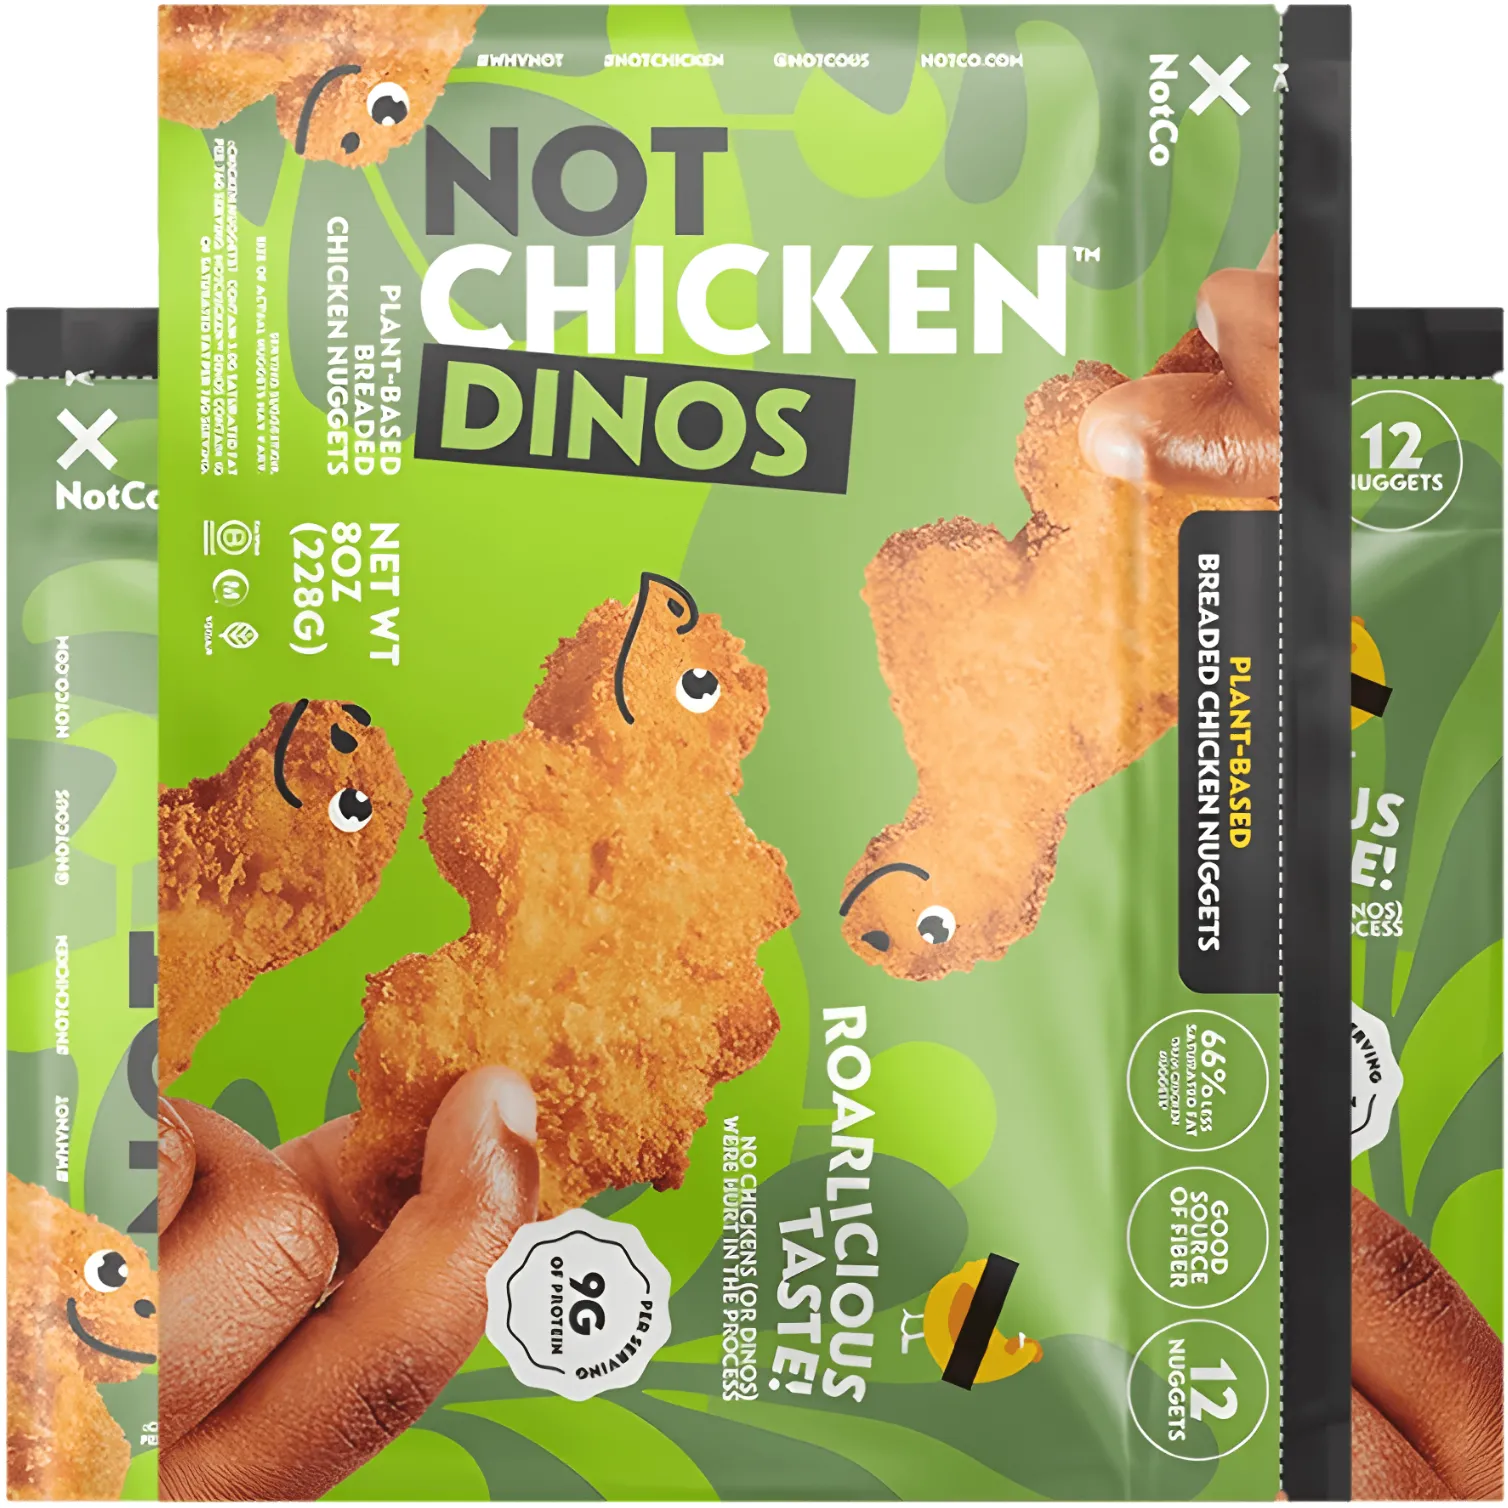 Free Notco Plant-Based Dinos Nuggets